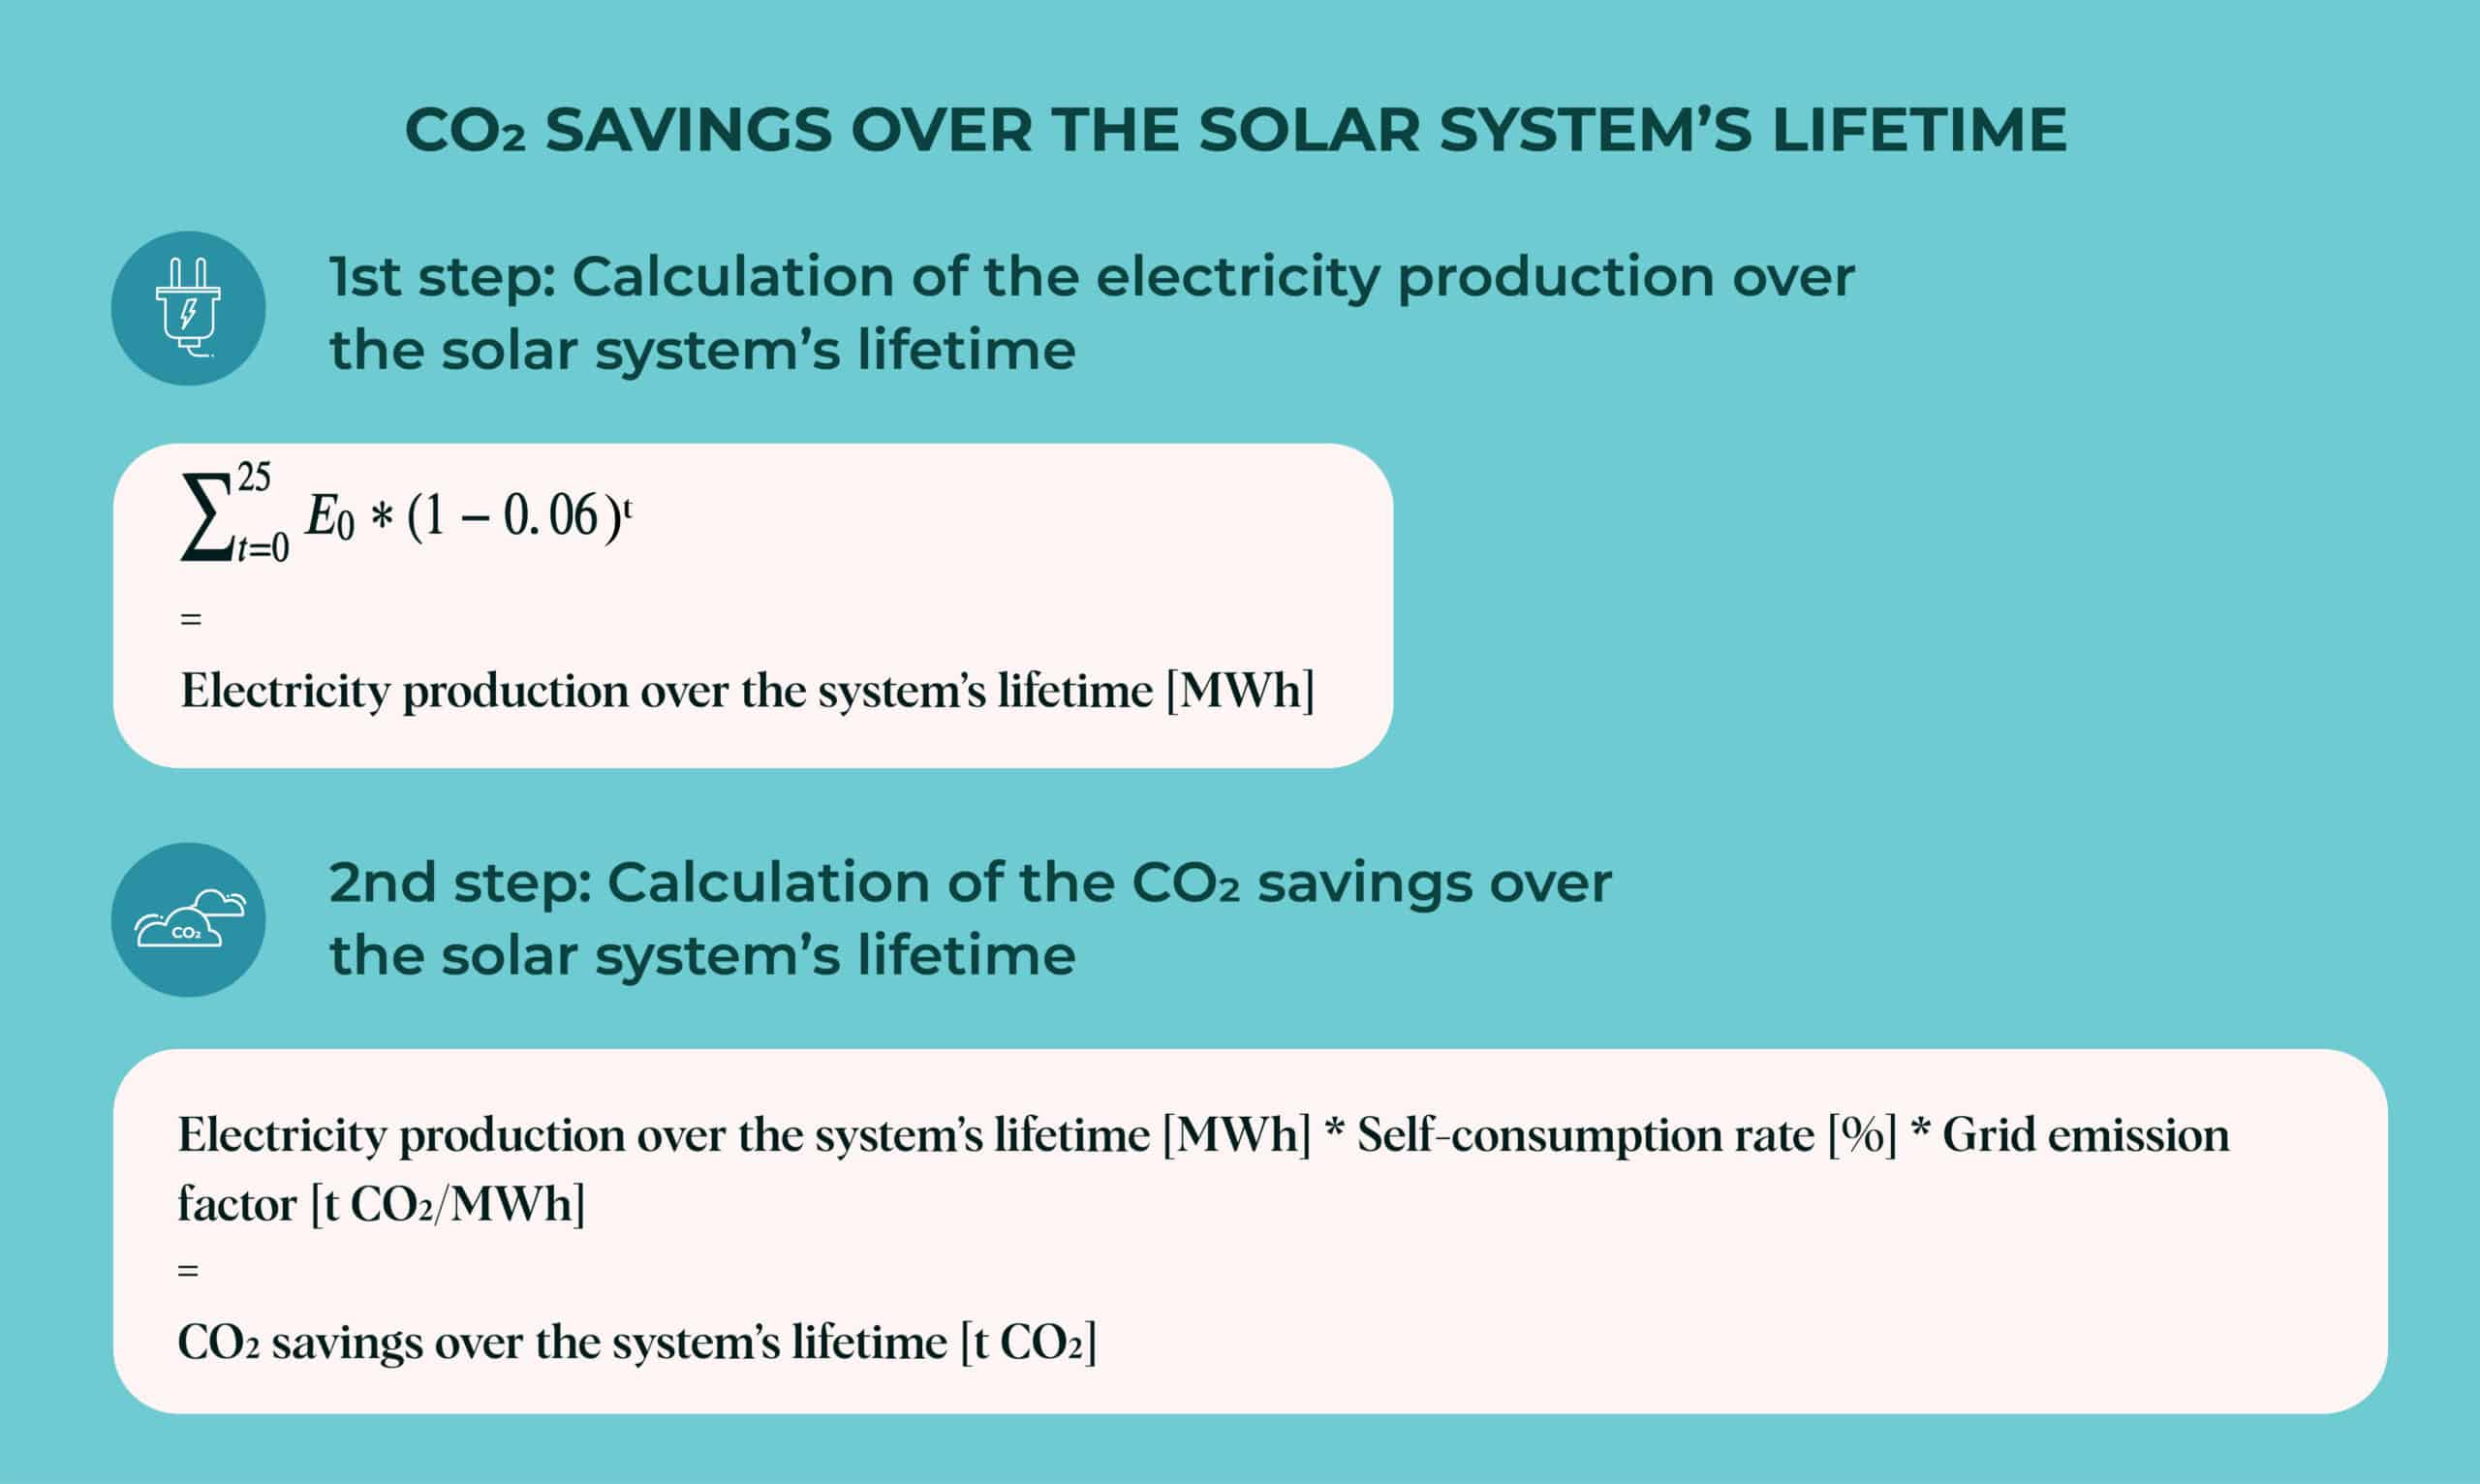 Co2 savings over the system's lifetime